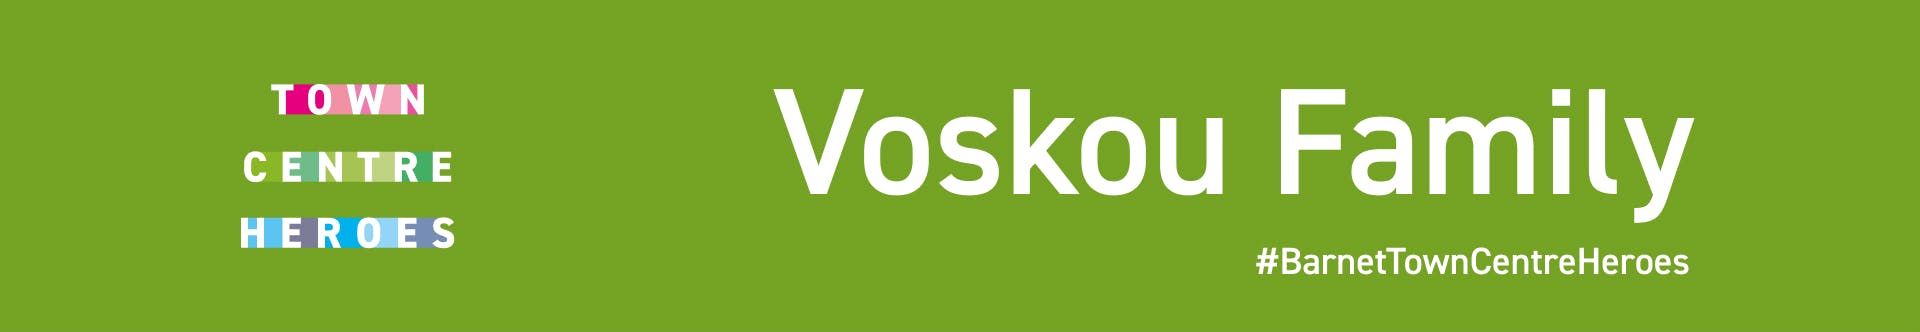 Town Centre Heroes Voskou Family